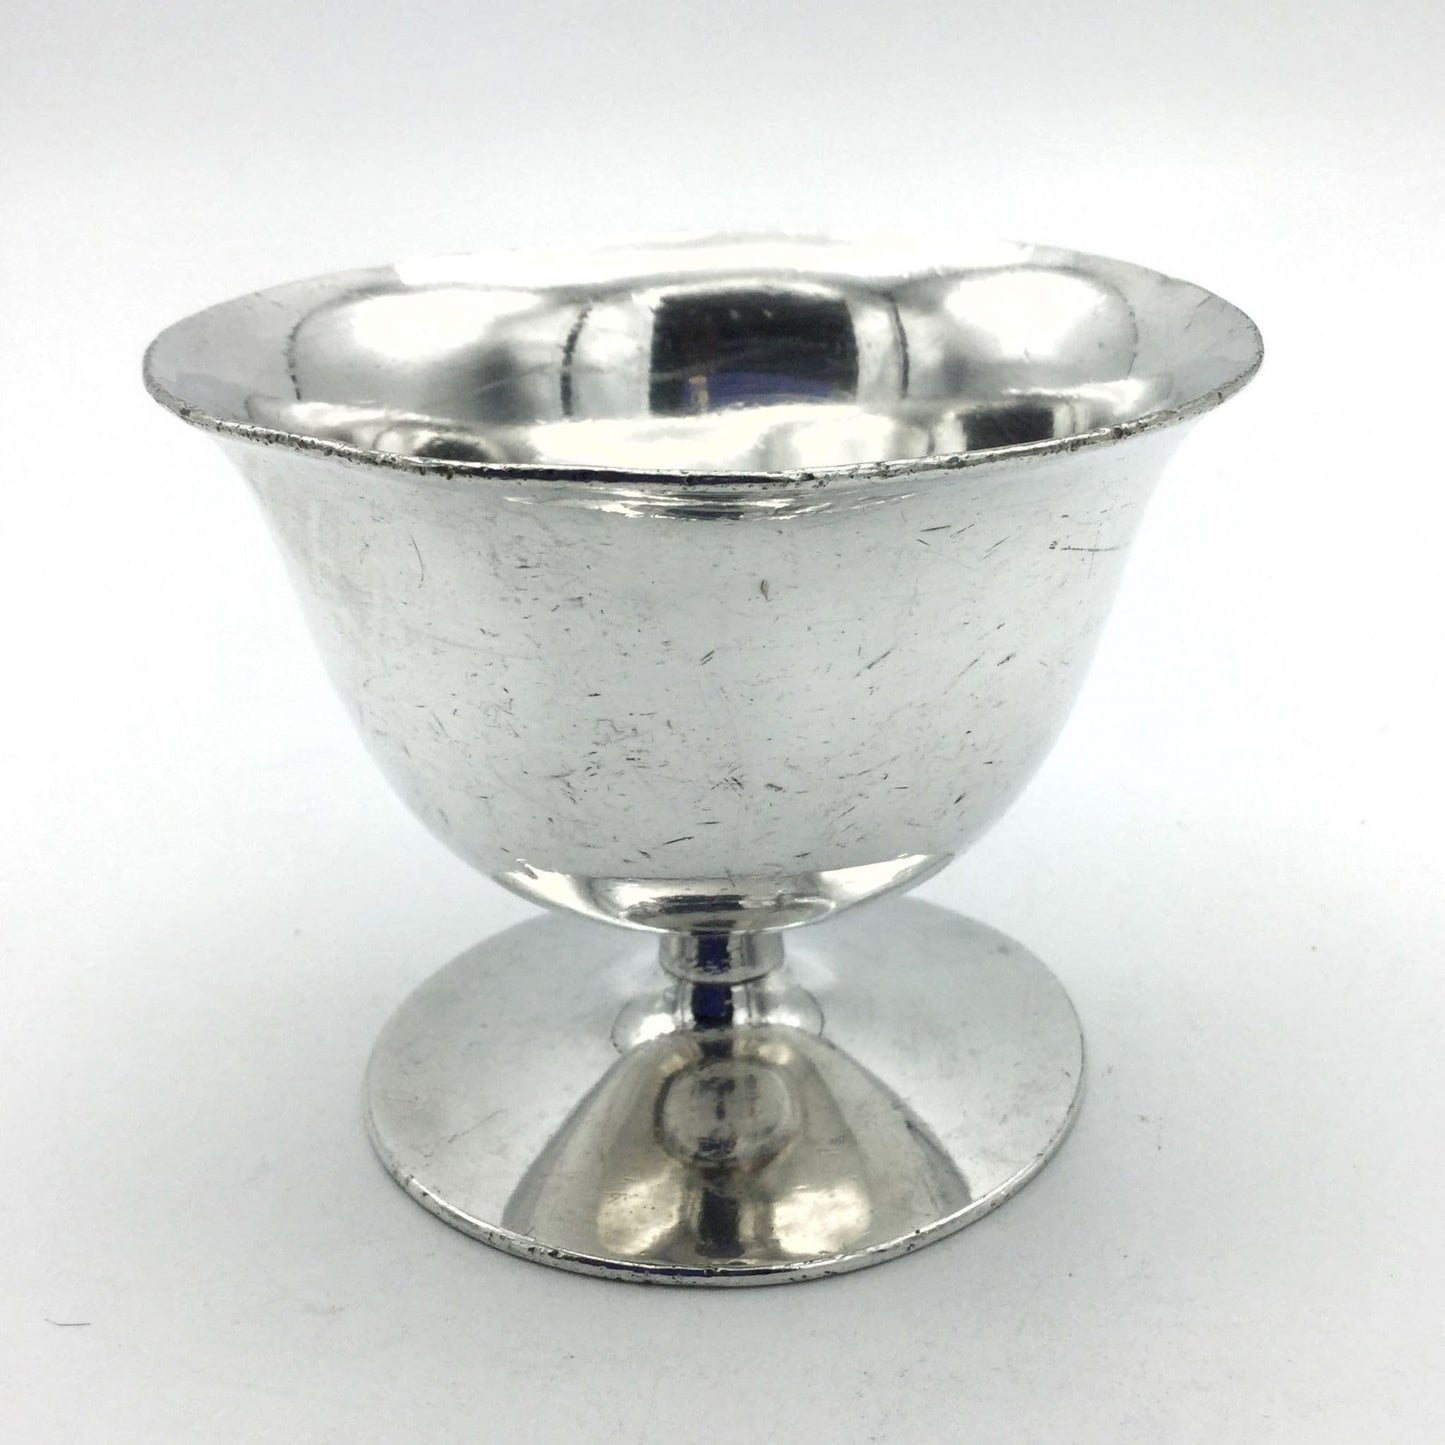 Vintage 1930s Mappin & Webb Silver Plated Wine Goblet/ Chalice, Grosvenor House